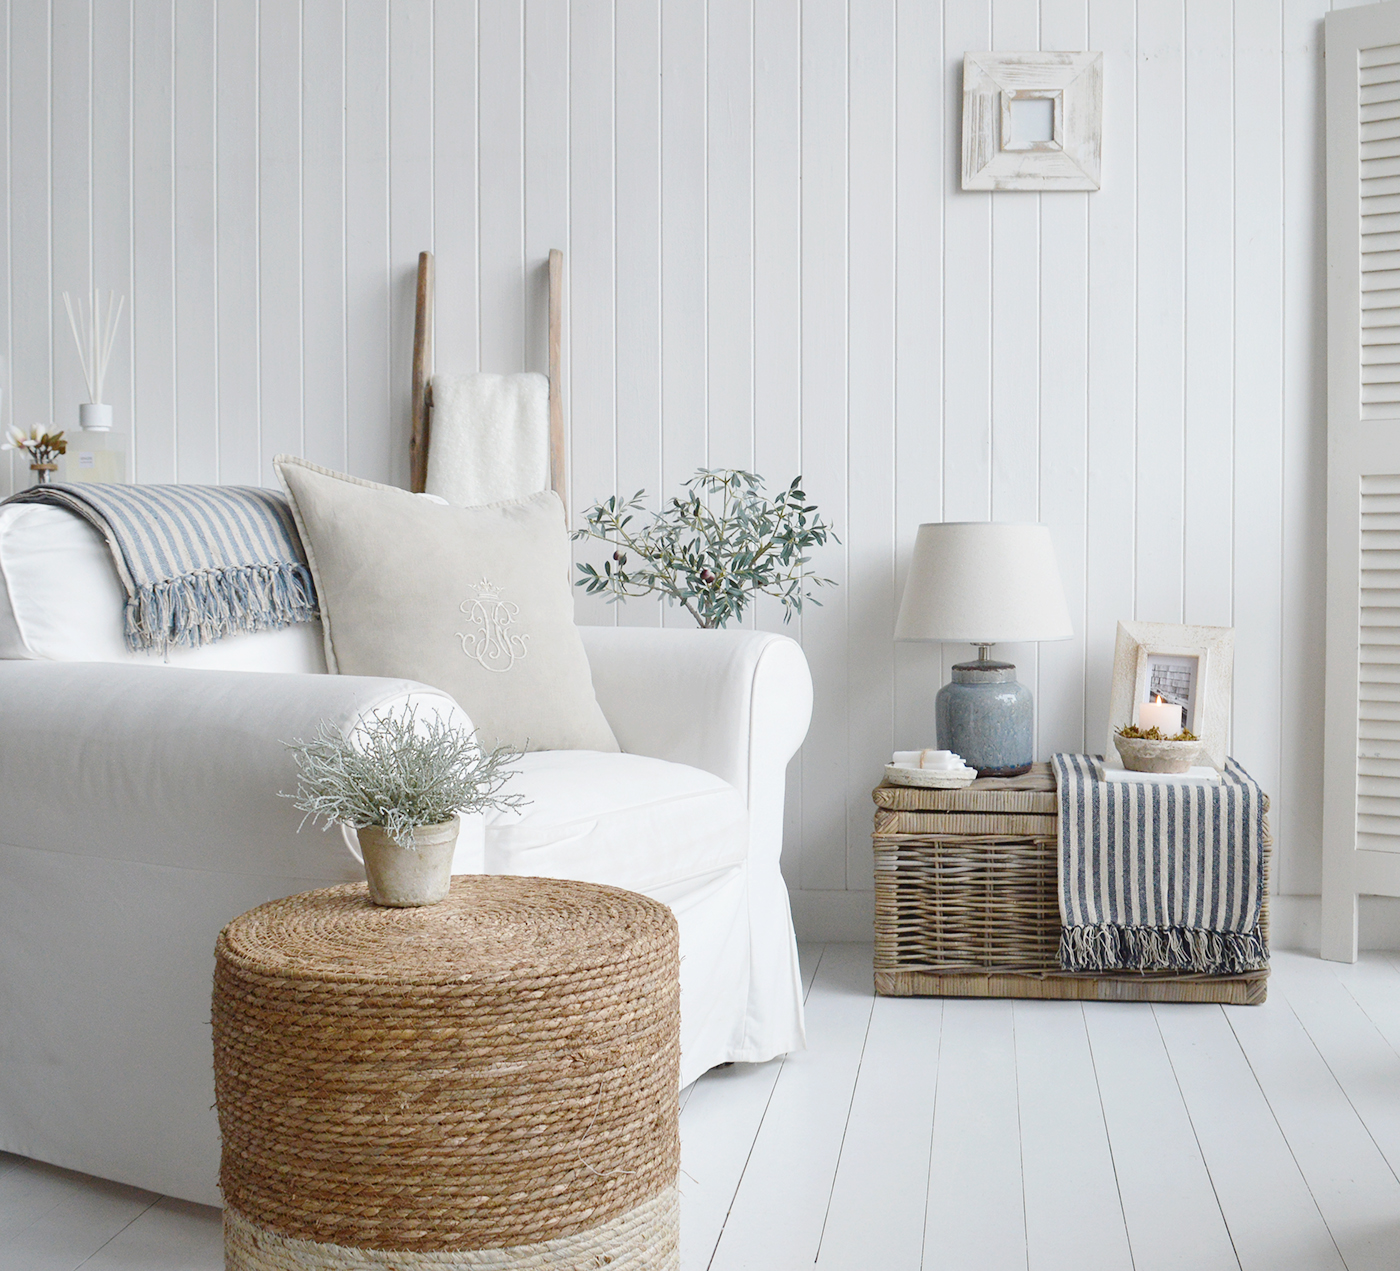 A white and blue living room for a luxurious Hamptons coastal feel - showing our pieces of coastal furniture including the Seaside basket table, Fall river stool, Driftwood ladder and beach house cushions and throws